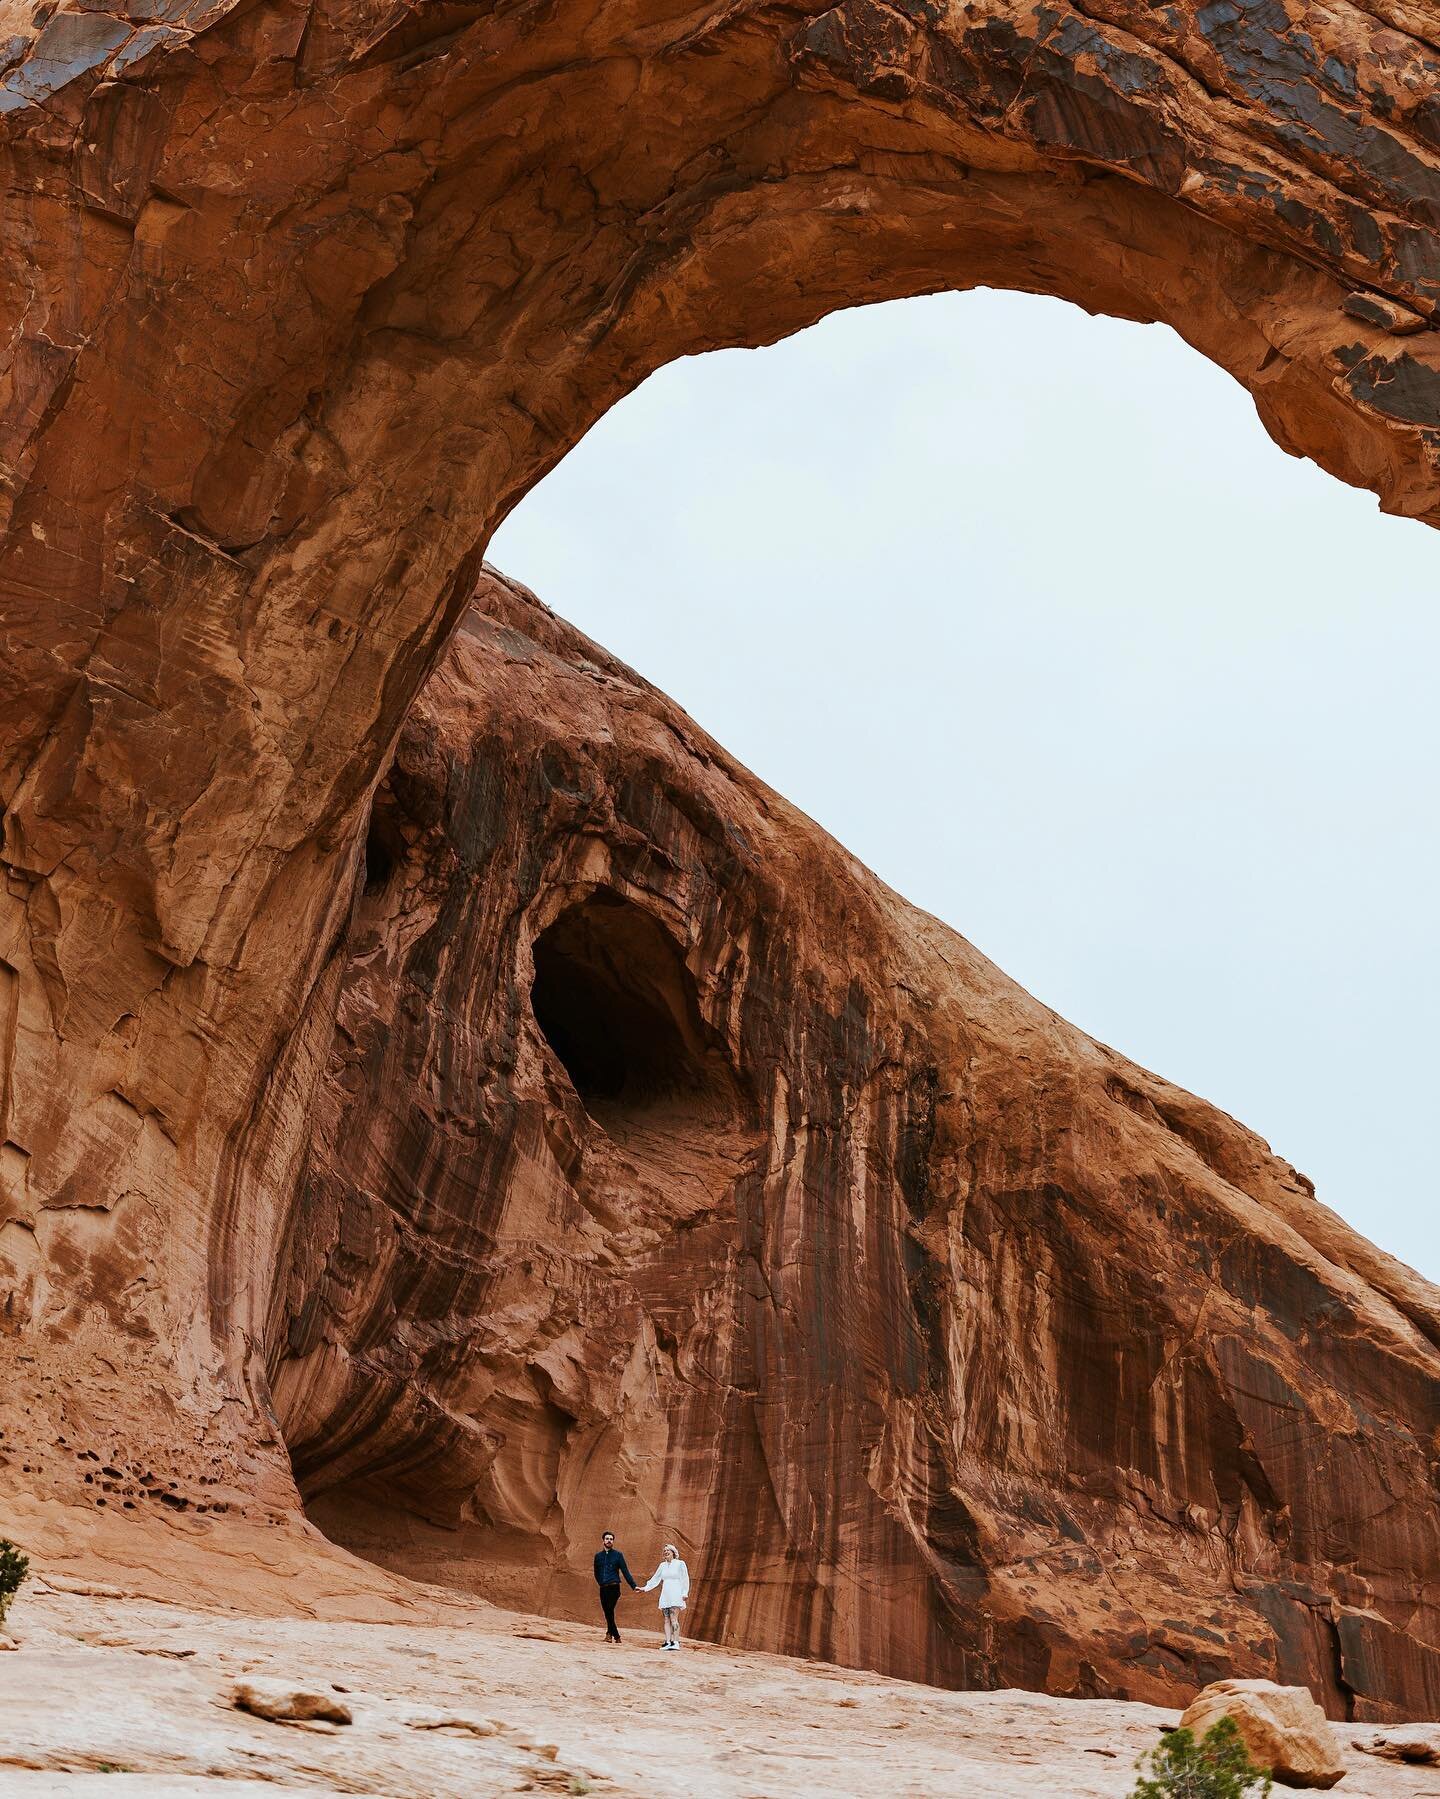 Moab Elopement Mini Guide: How to Elope in Moab

From massive canyons to huge natural rock arches- Moab has so much to offer for a desert elopement location, if you&rsquo;re considering Moab for your adventure elopement keep reading to learn more abo